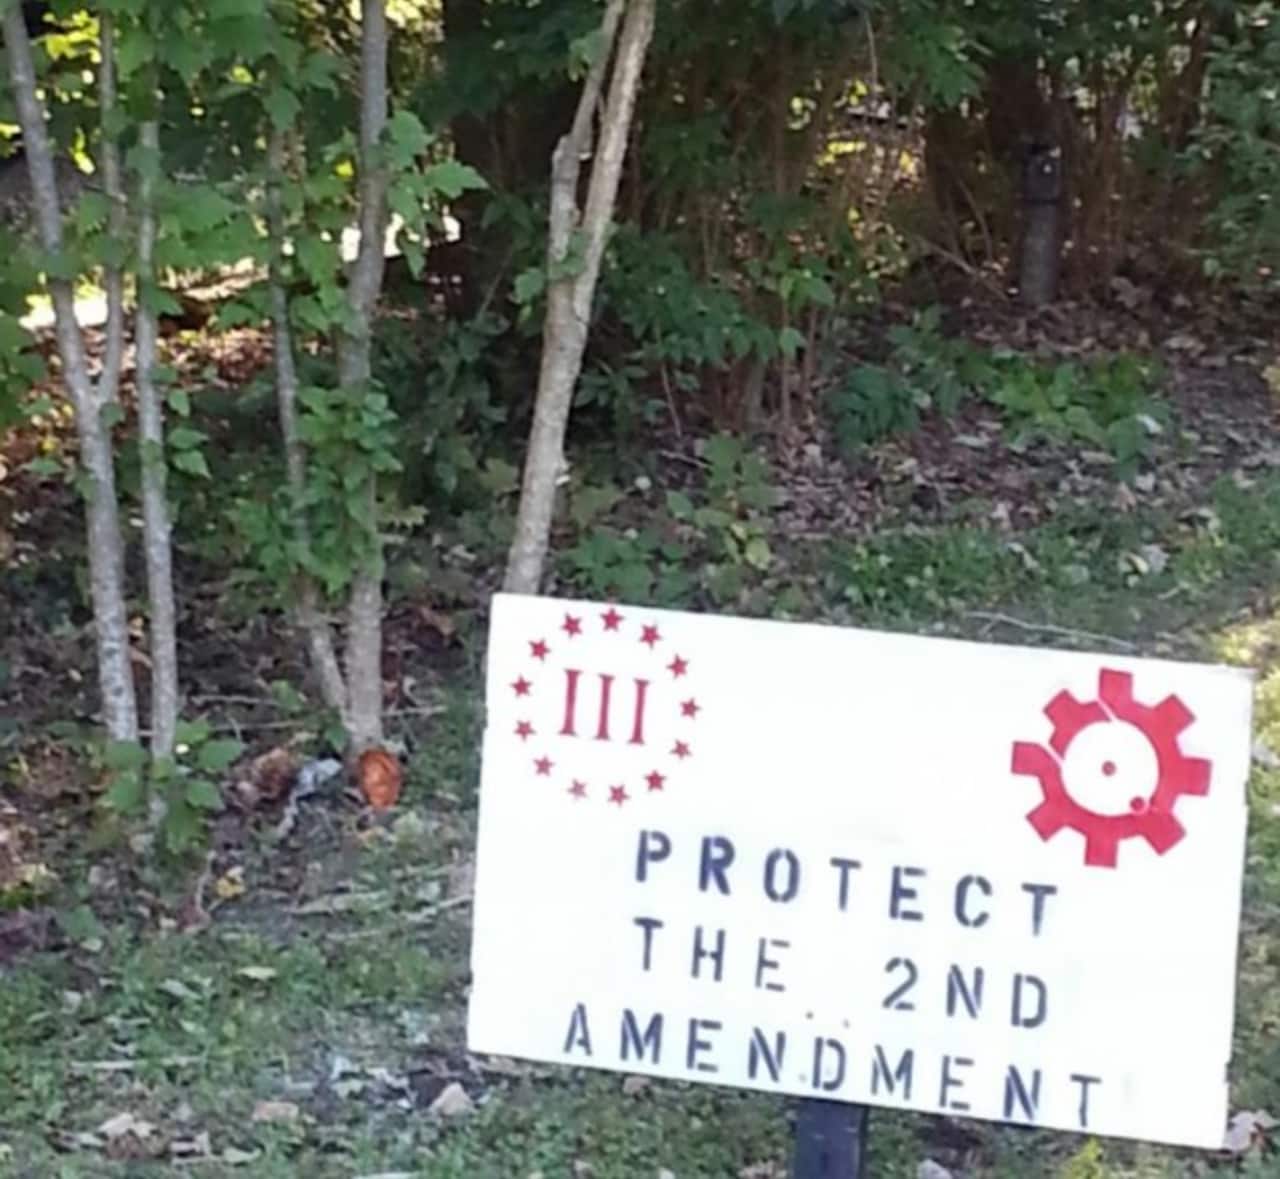 TheBlaze reported Monday night that Jon Gibson, of Lake Lincolndale, was fed-up after his pro-gun sign was removed from his front yard for a third time.